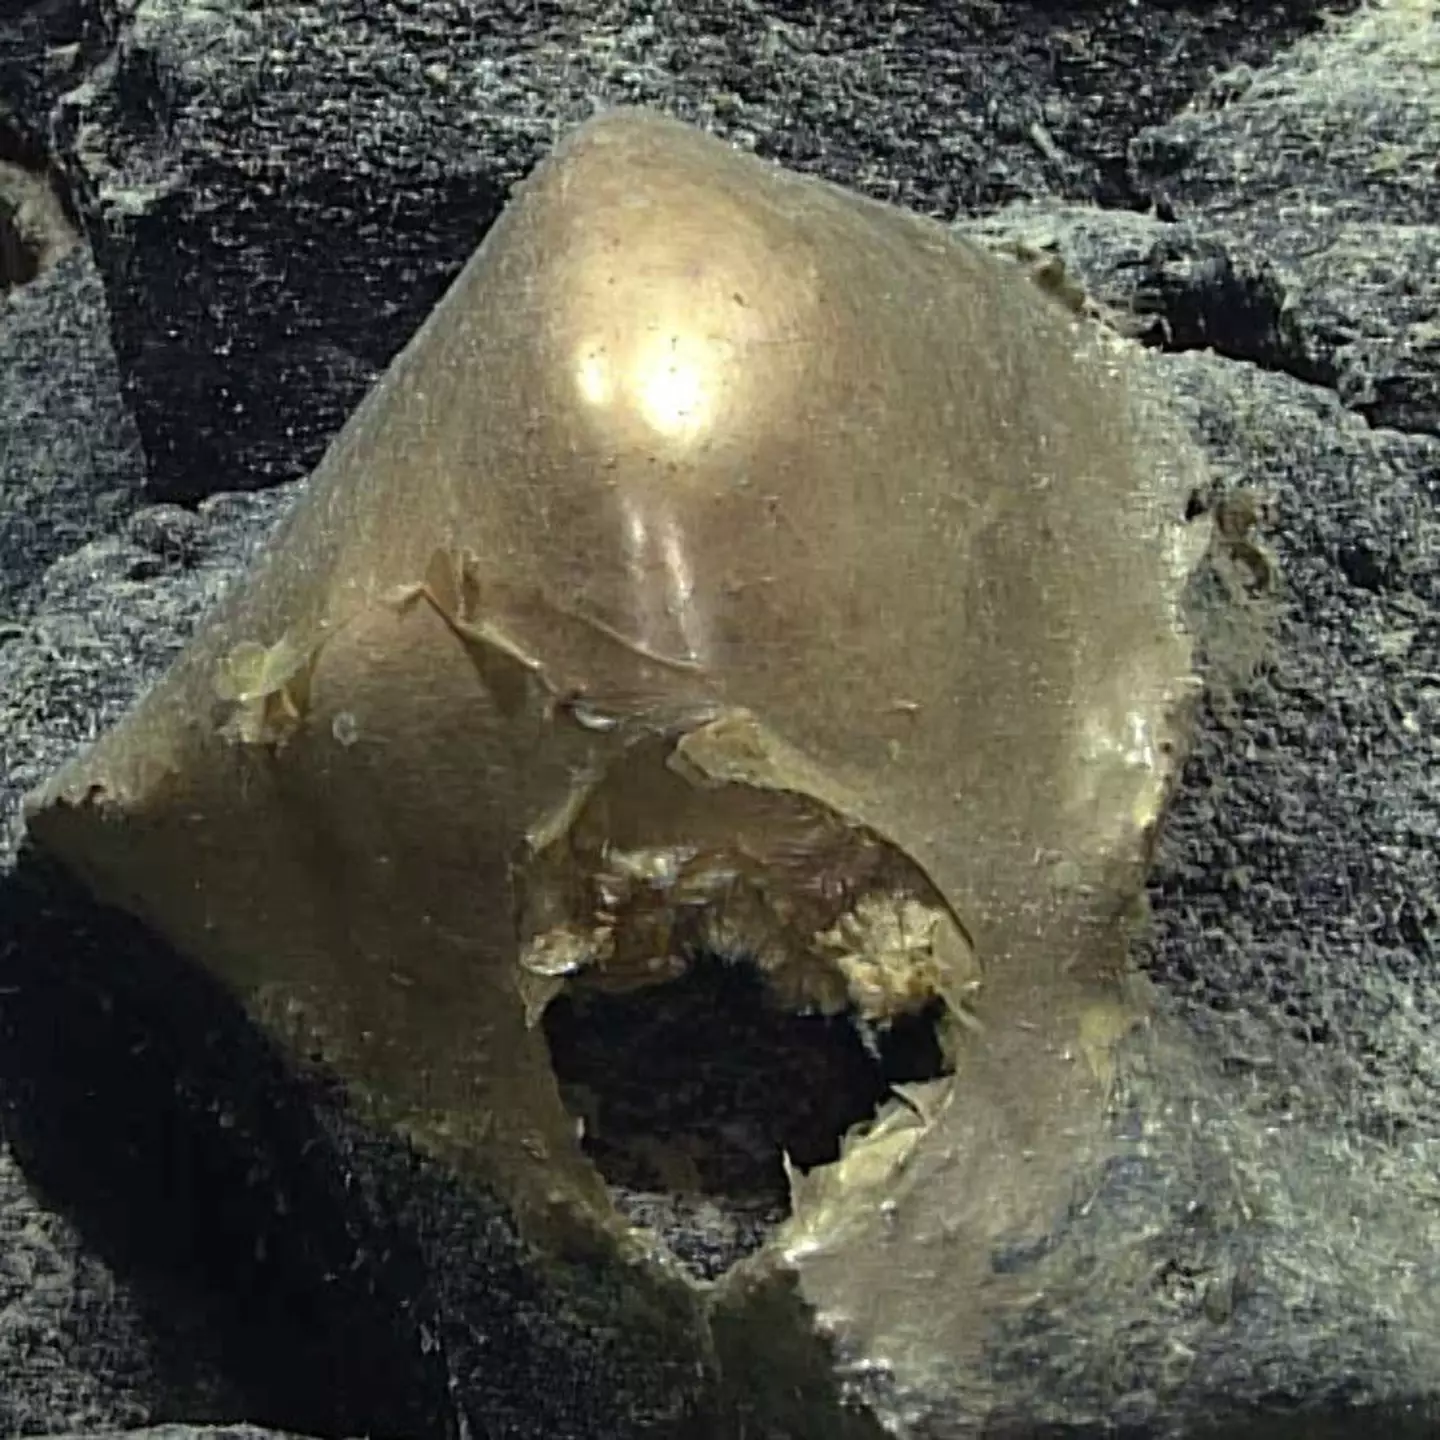 The 'golden egg' found on the seafloor off the Gulf of Alaska.